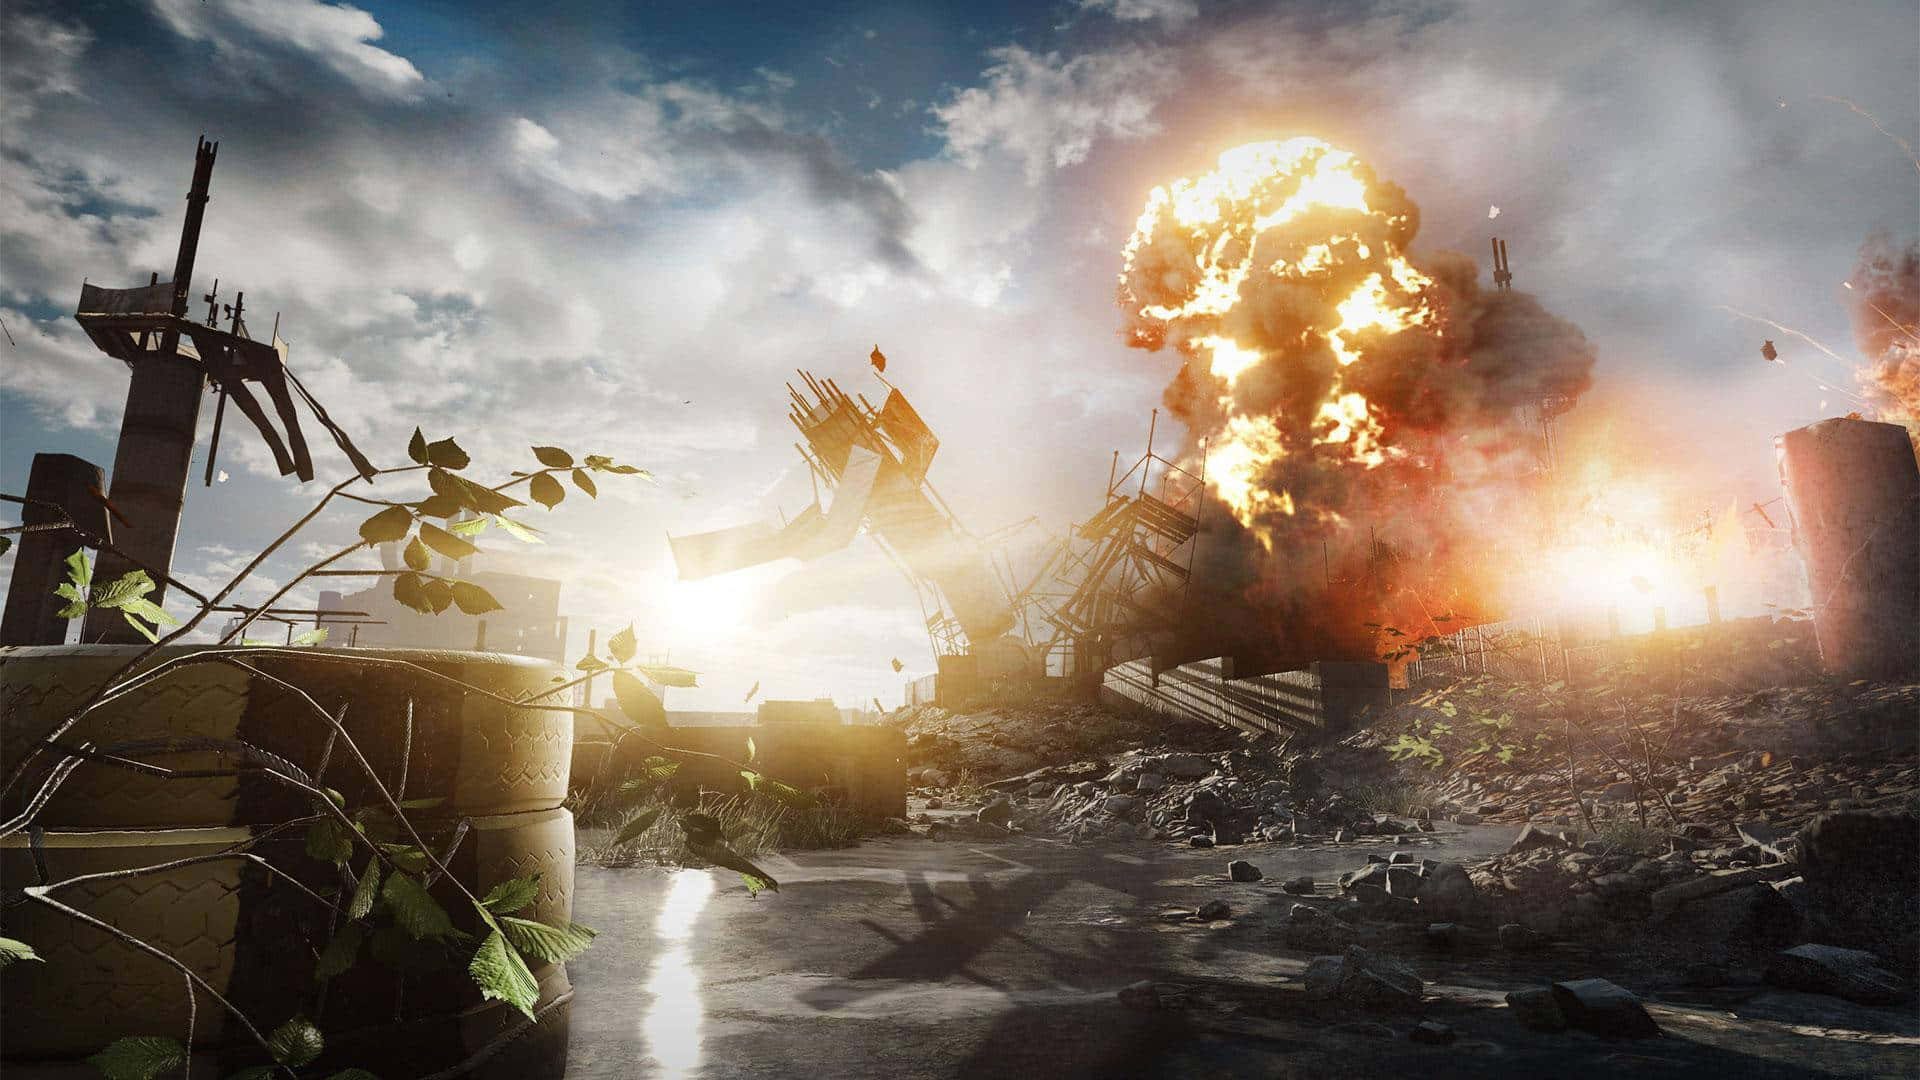 "Fire Up Your Next Battle with Battlefield 4"